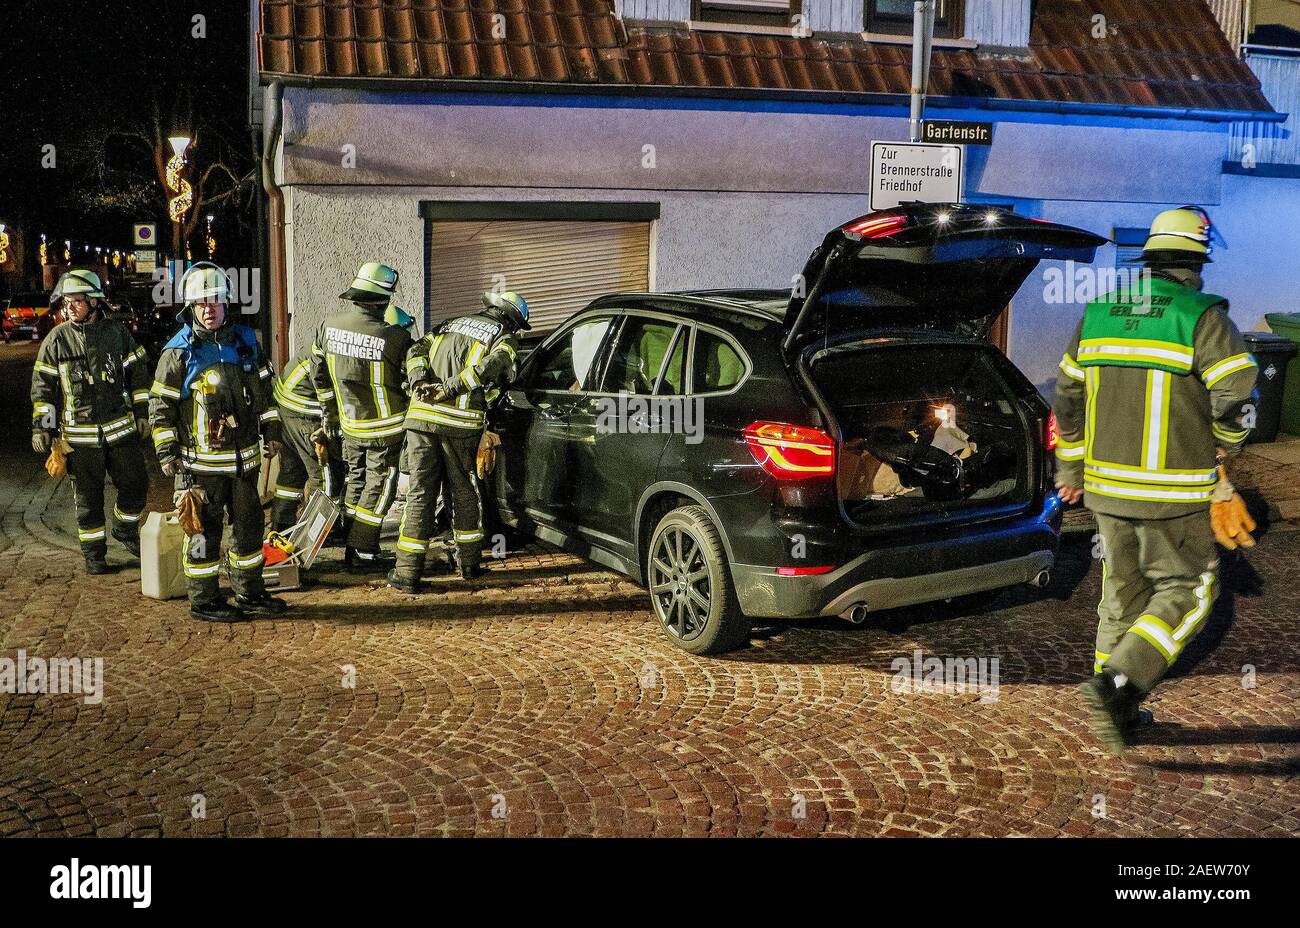 Gerlingen, Germany. 11th Dec, 2019. Firefighters are standing next to a car with a destroyed hood in front of a partially smashed living room wall of a detached house. A 26-year-old female driver probably left the road in a left-hand bend and entered the house frontally, probably as a result of speeding too high. According to initial findings, the resident and the 26-year-old remained uninjured. The house was so badly damaged that it is in danger of collapsing. Credit: Andreas Rometsch/KS-Images.de/dpa/Alamy Live News Stock Photo